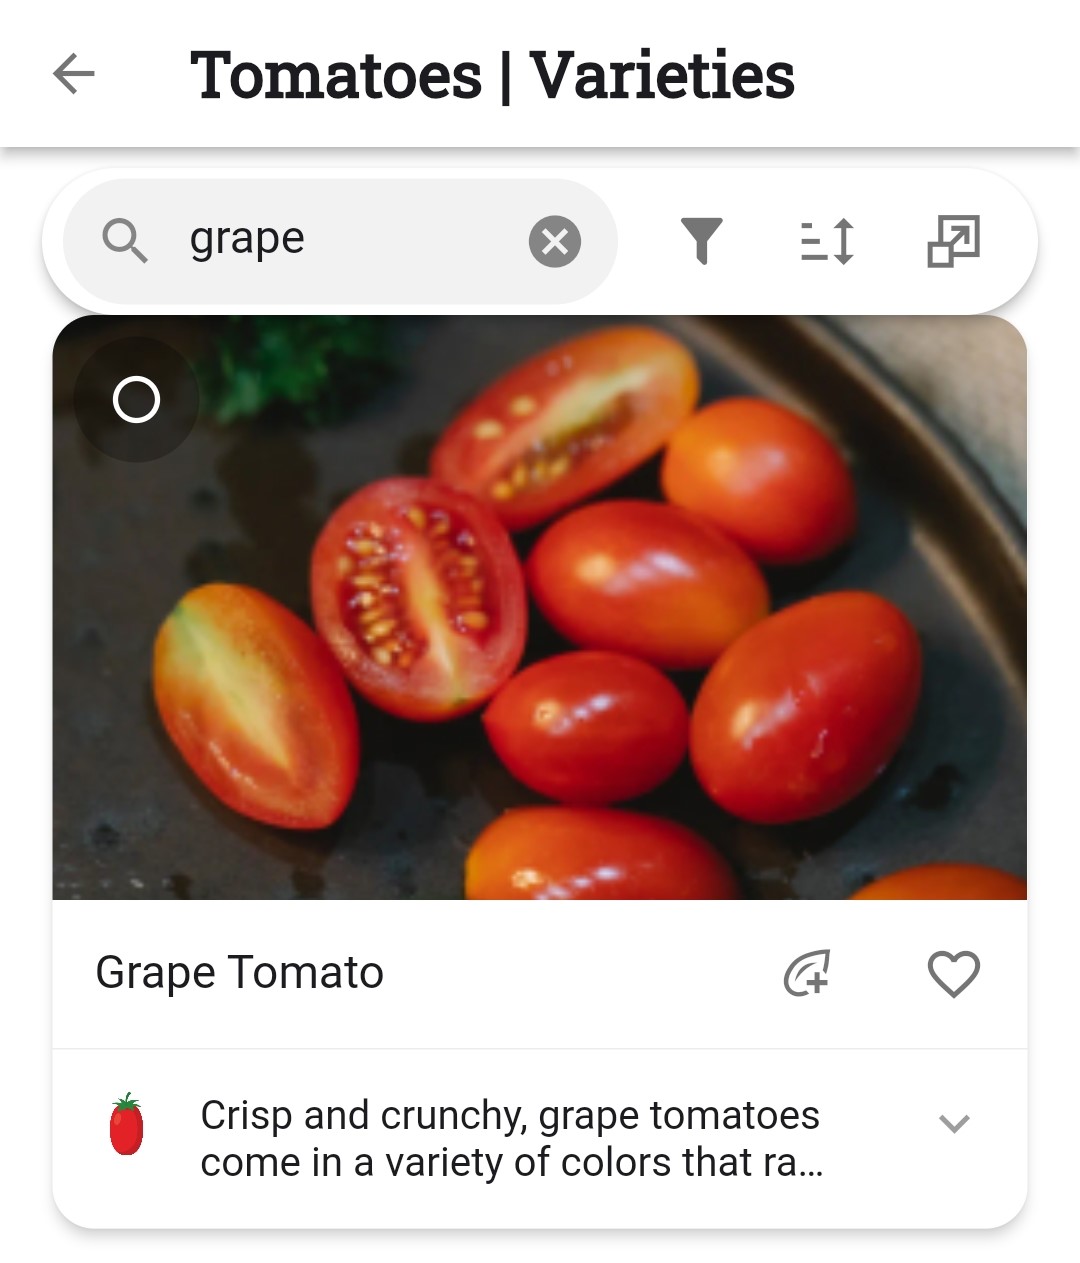 Screenshot of the Varieties tab search bar with grape added